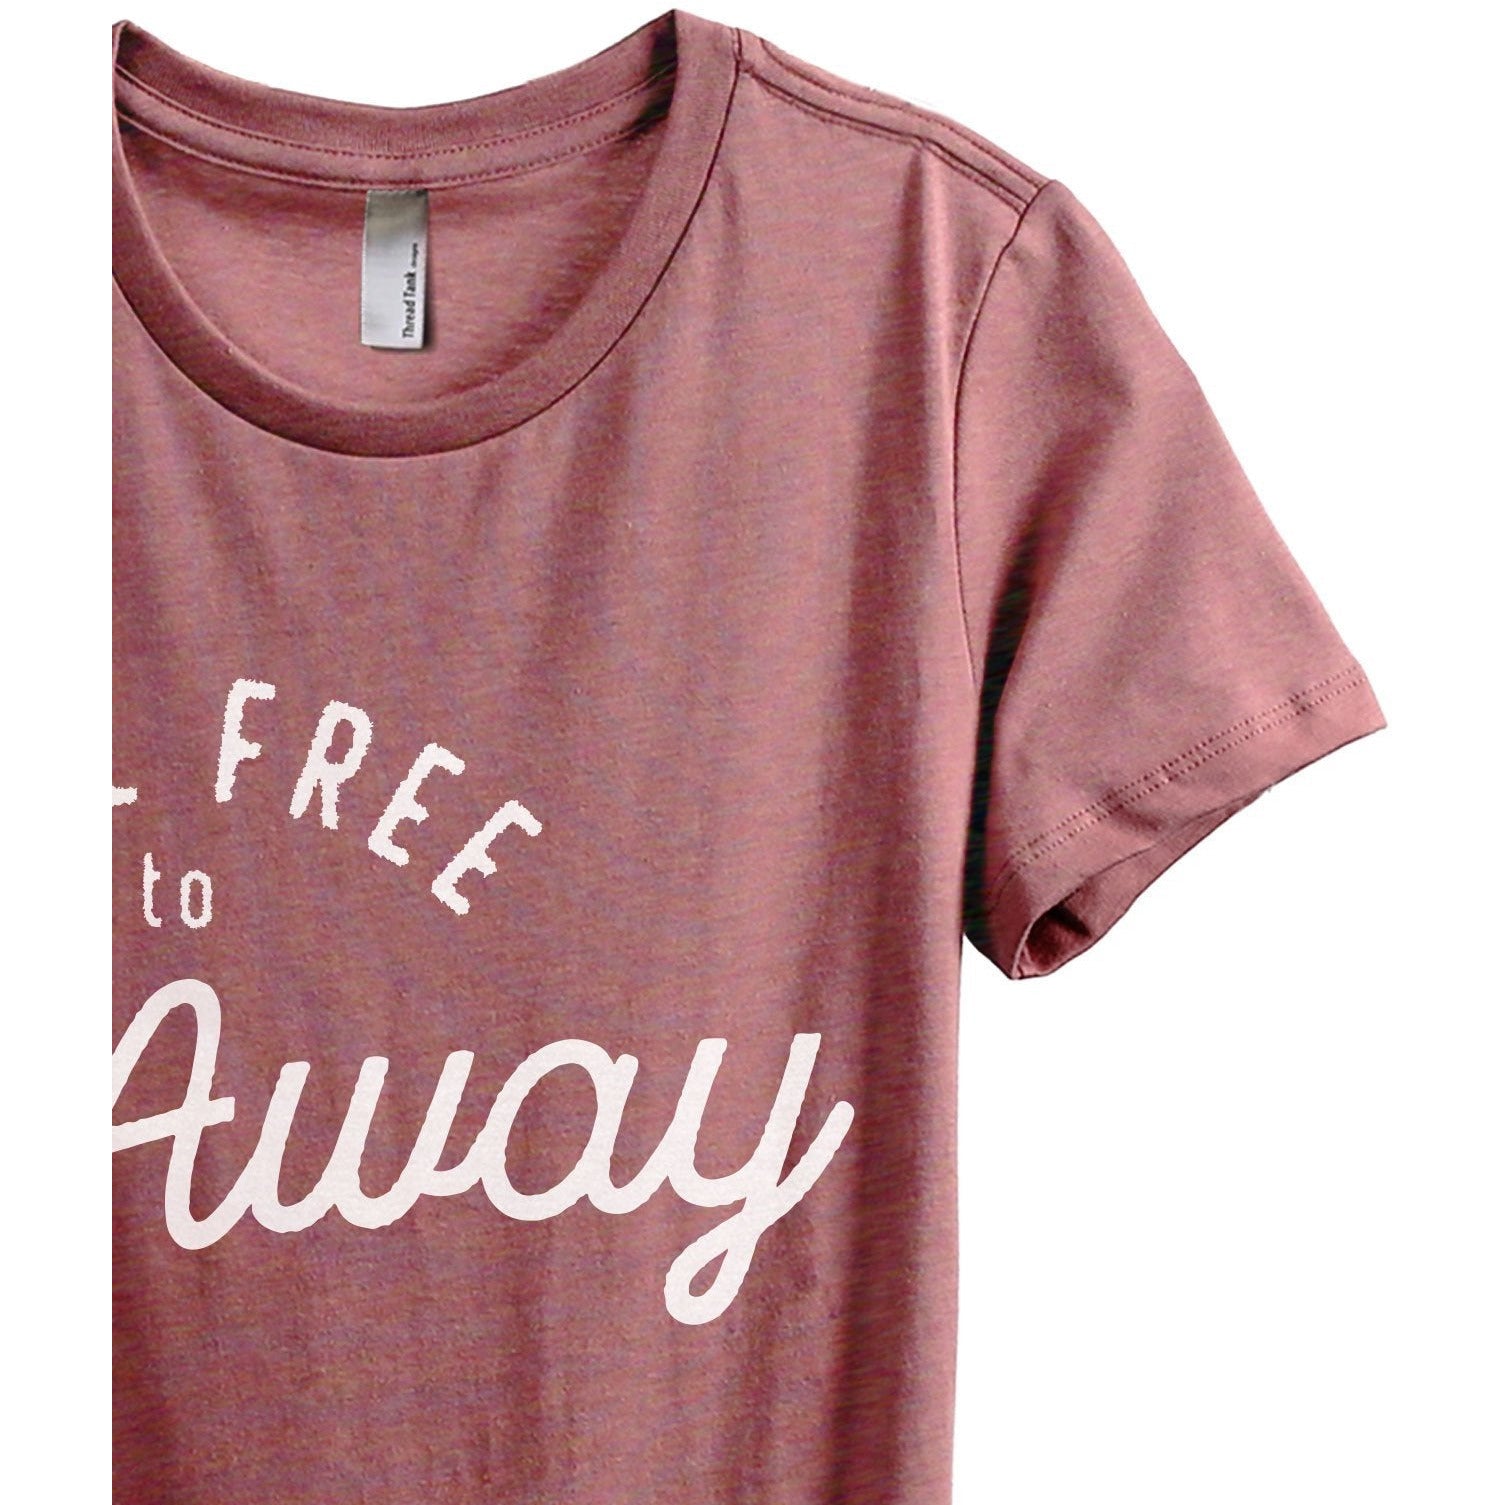 Feel Free To Go Away Women's Relaxed Crewneck T-Shirt Top Tee Heather Rouge Zoom Details
